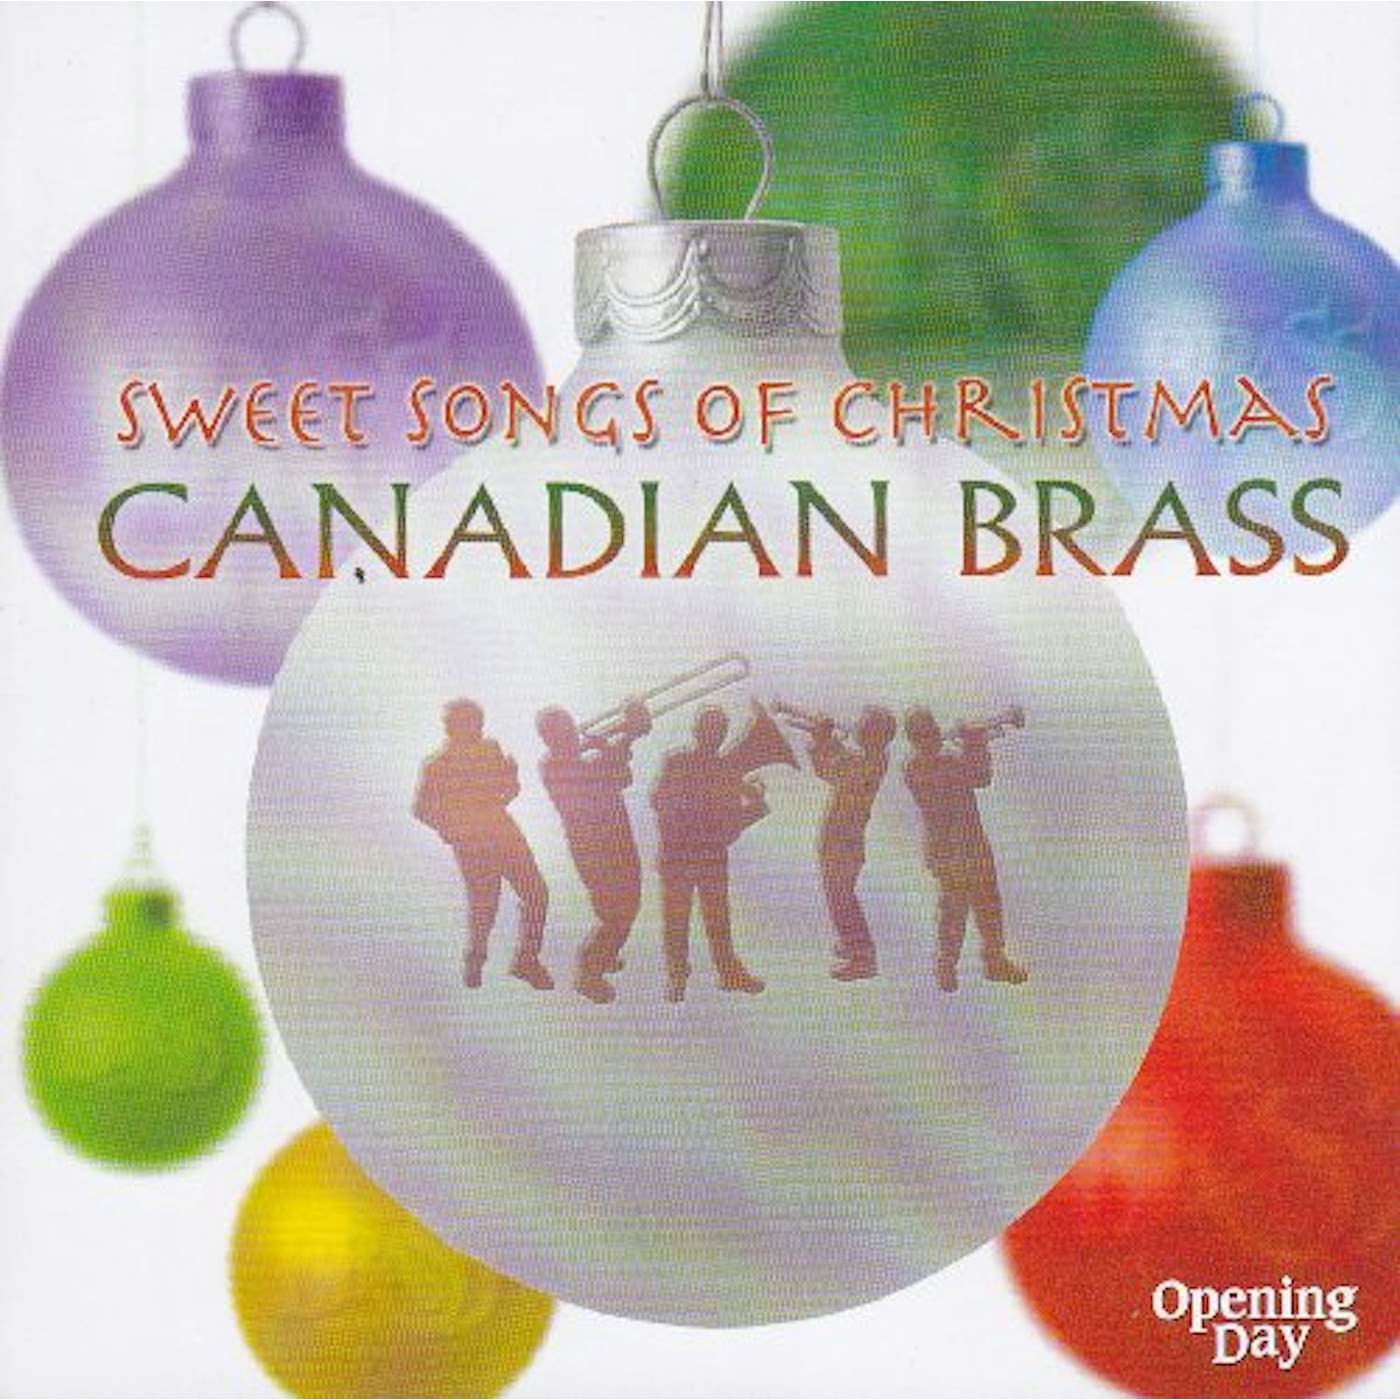 Canadian Brass SWEET SONGS OF CHRISTMAS CD